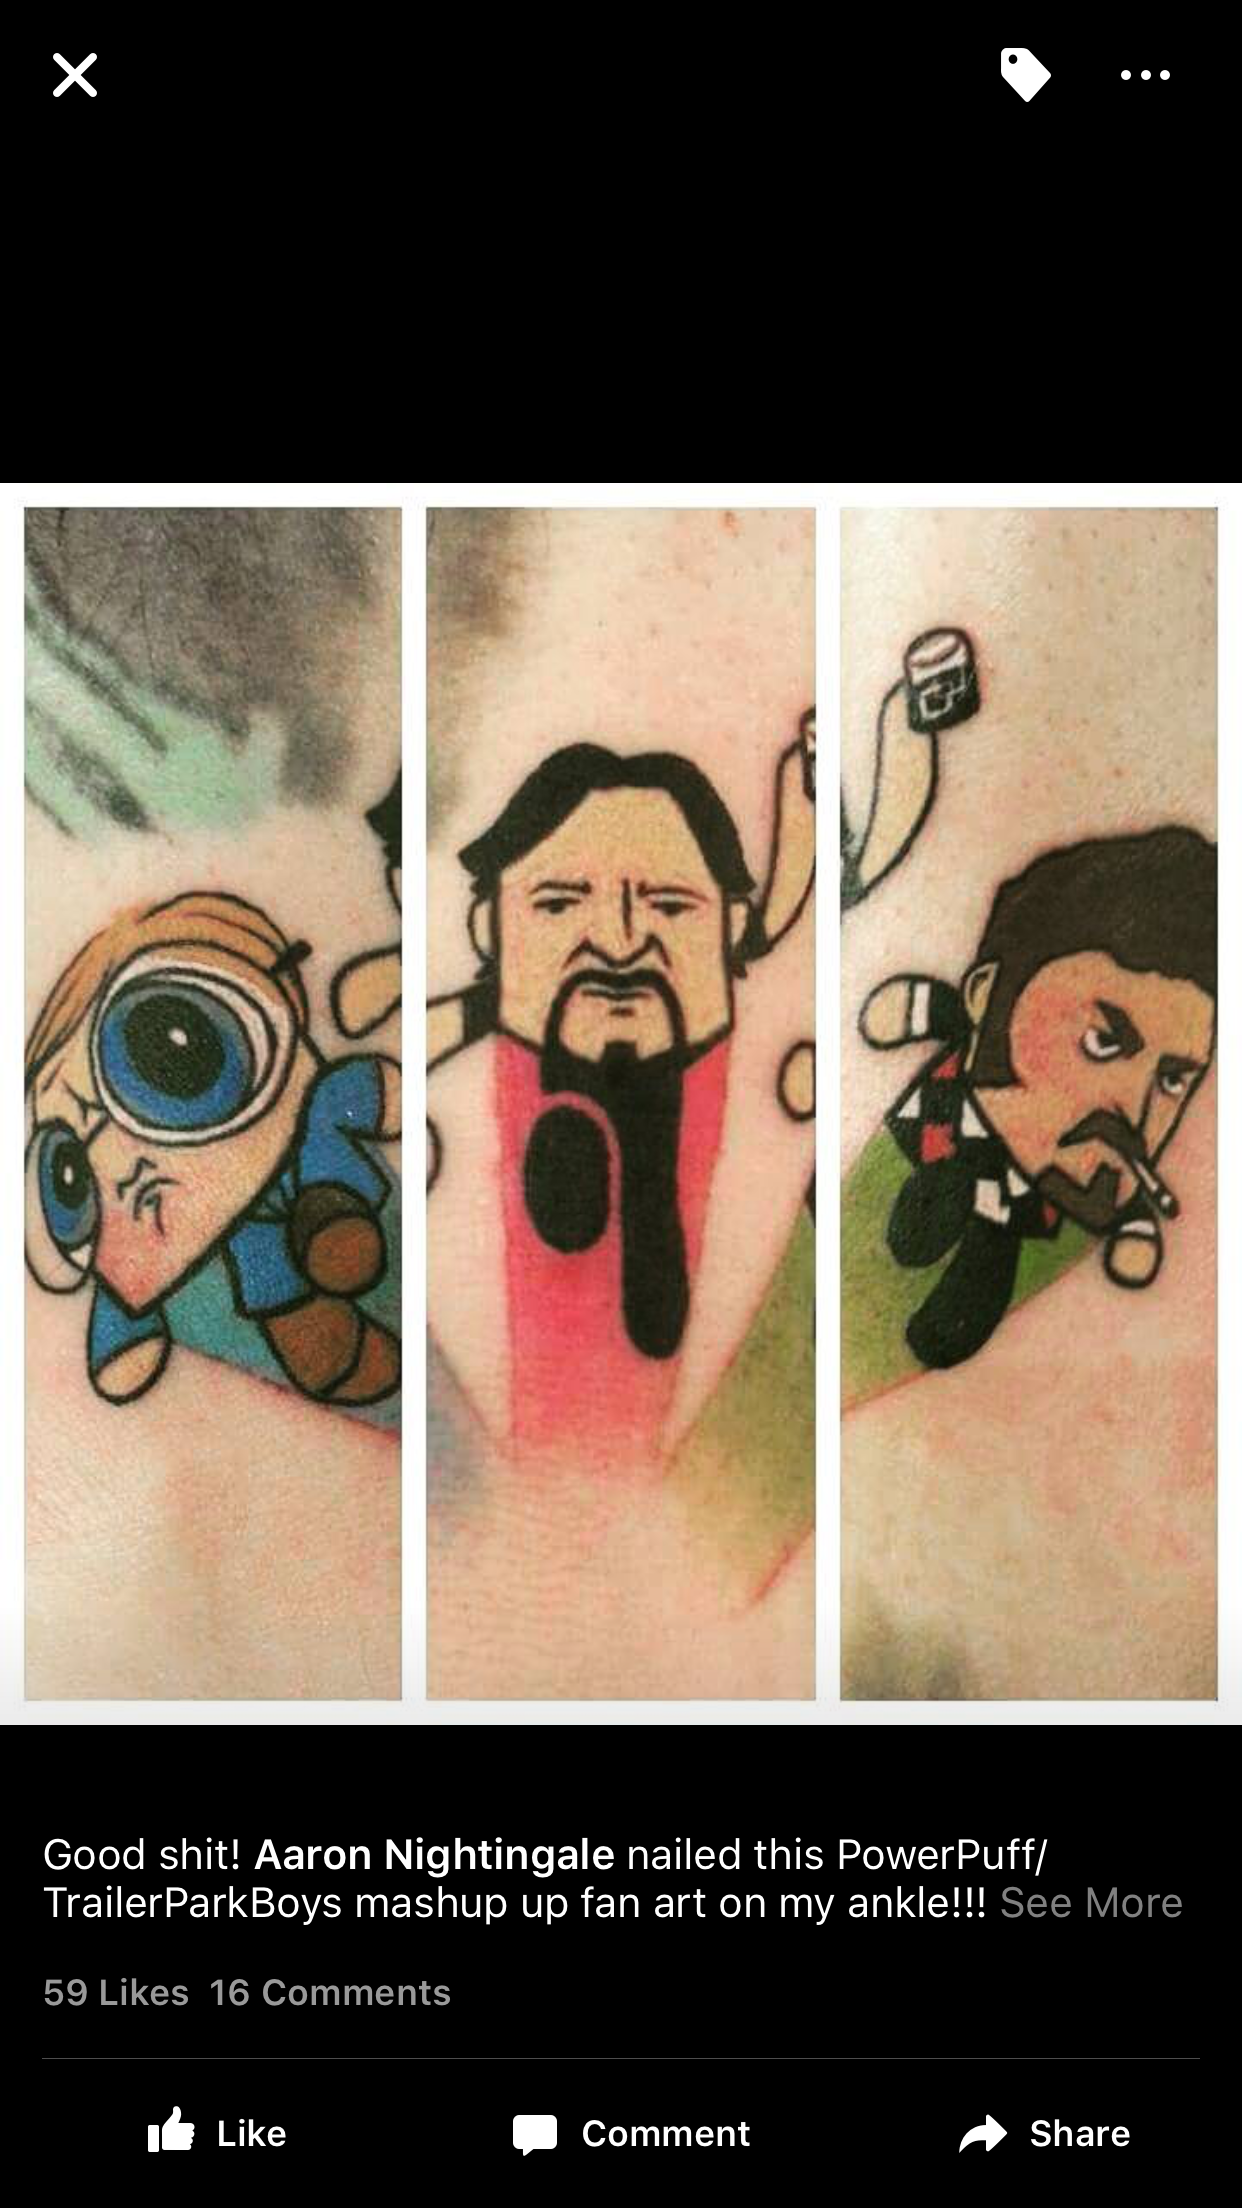 powerpuff trailer park boys tattoo - Good shit! Aaron Nightingale nailed this PowerPuff TrailerParkBoys mashup up fan art on my ankle!!! See More 59 16 Comment